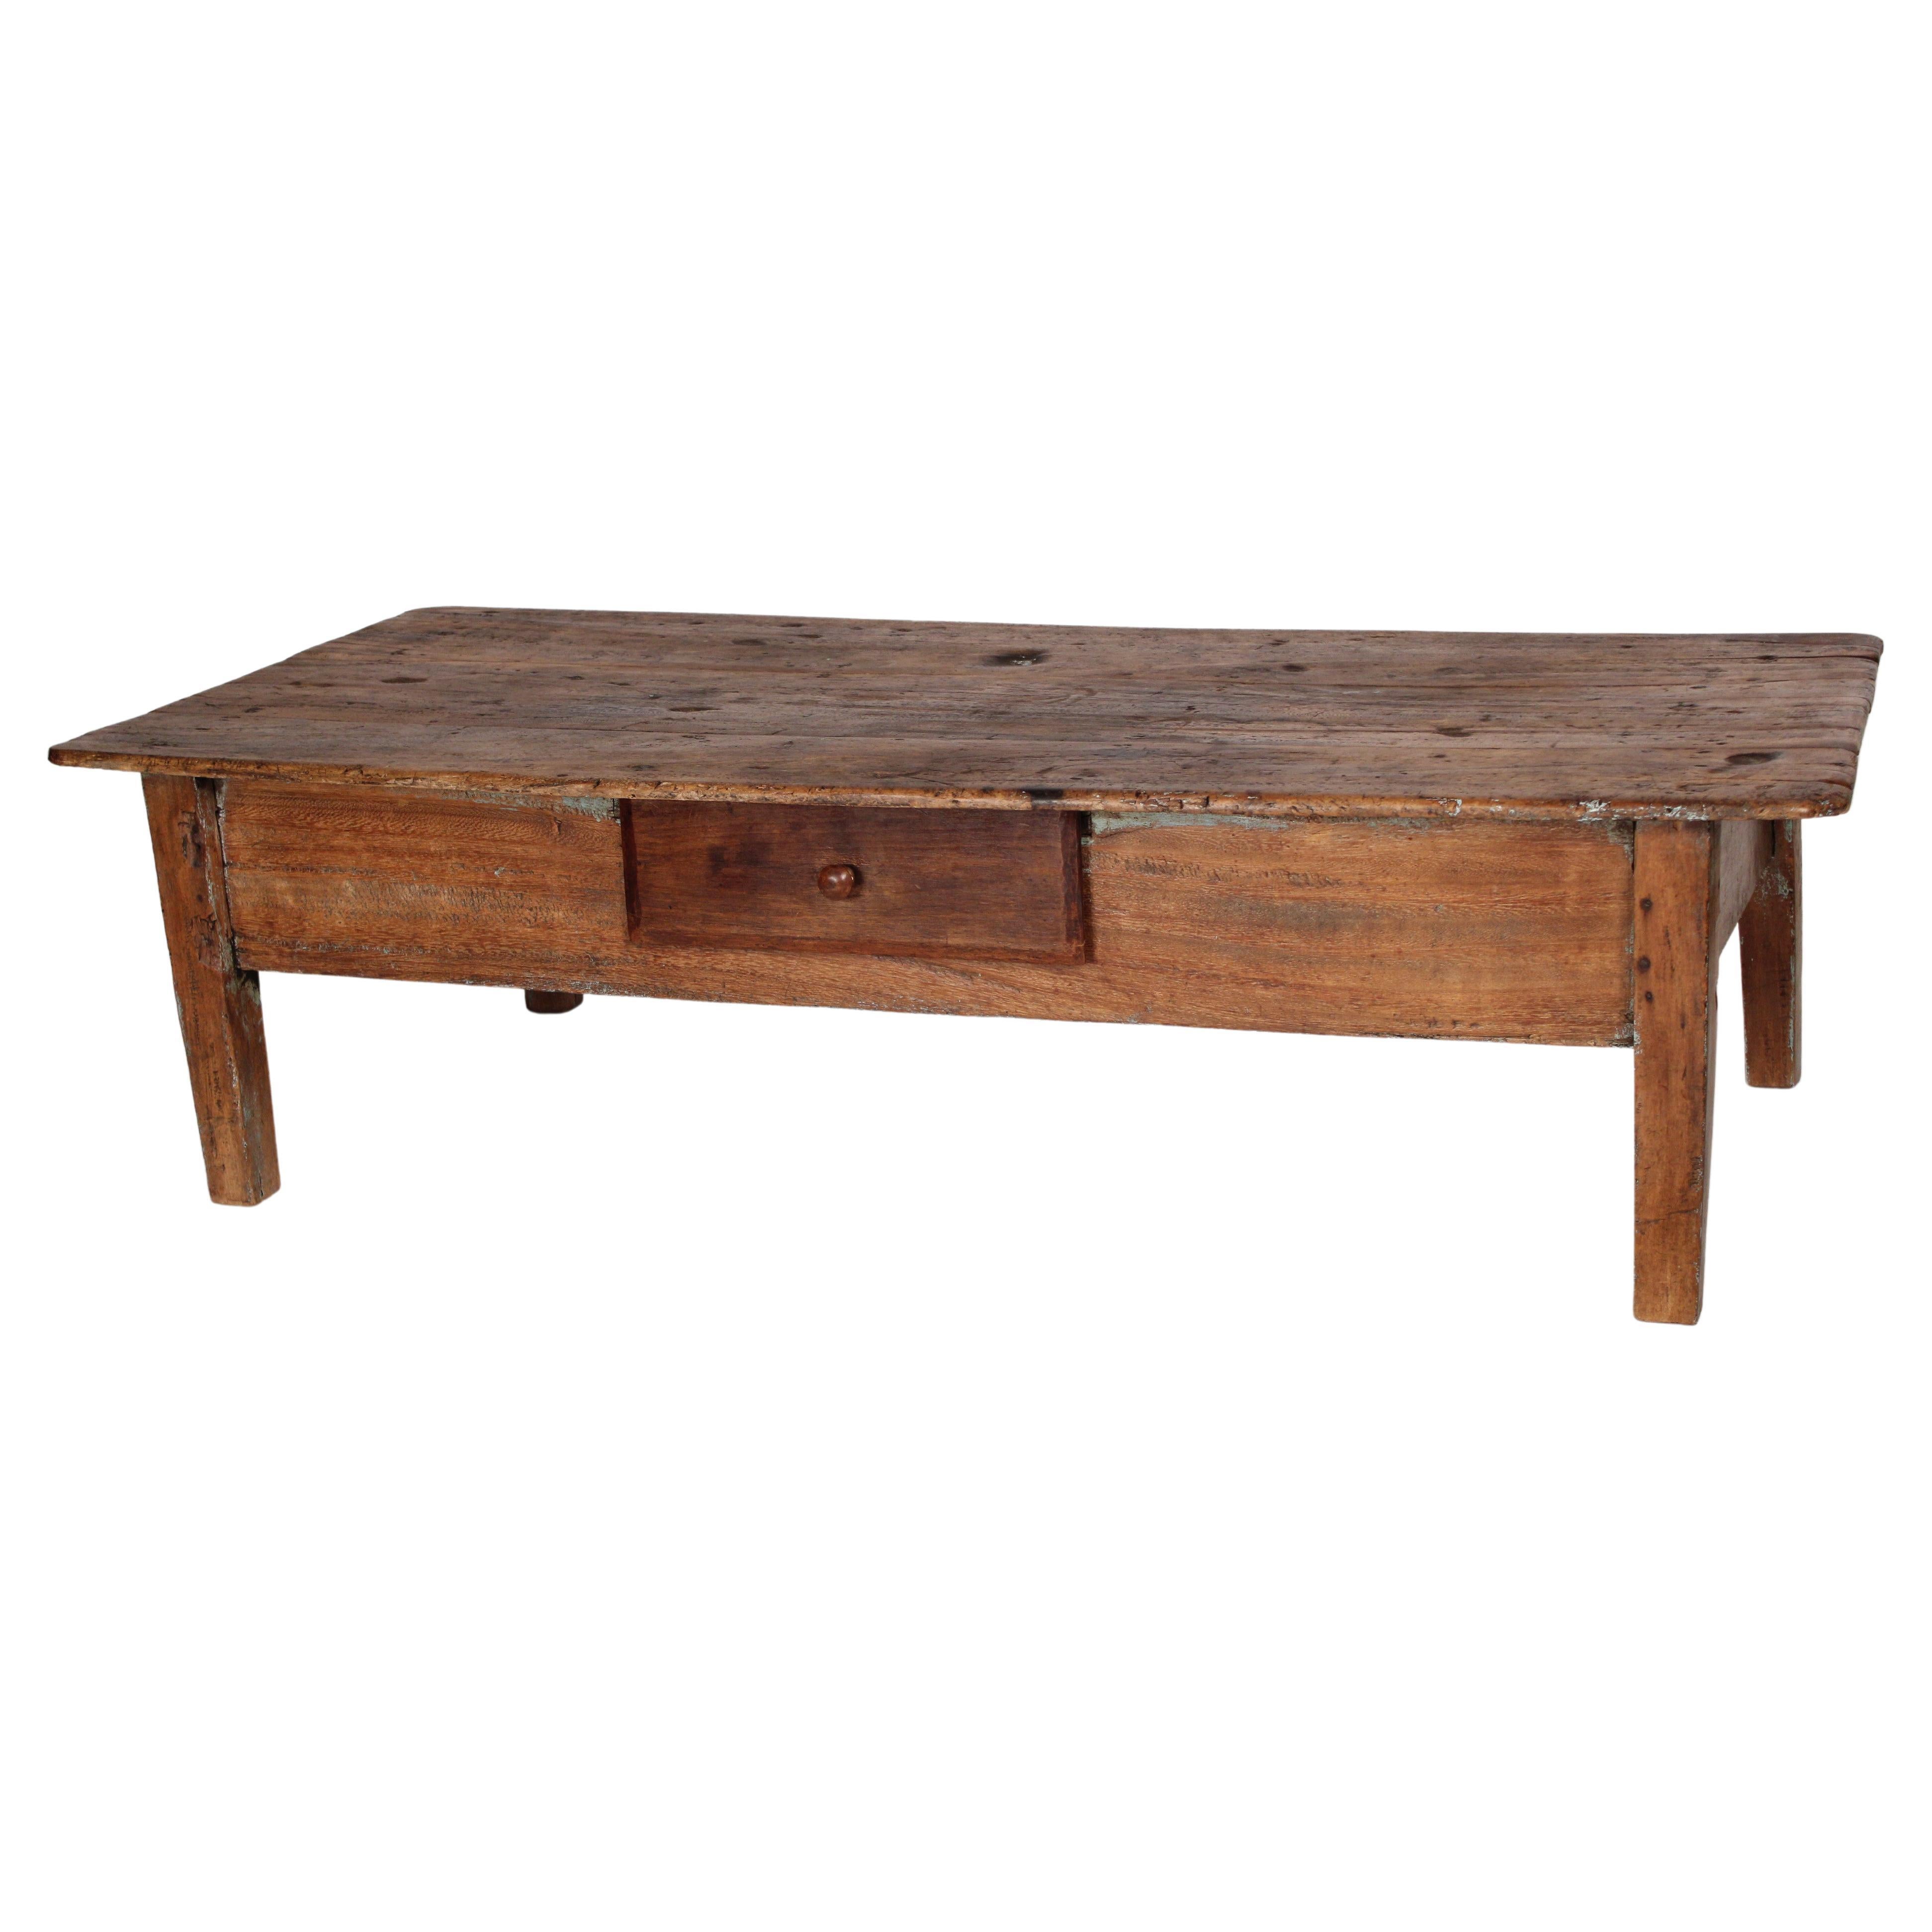 Rustic Country Coffee Table